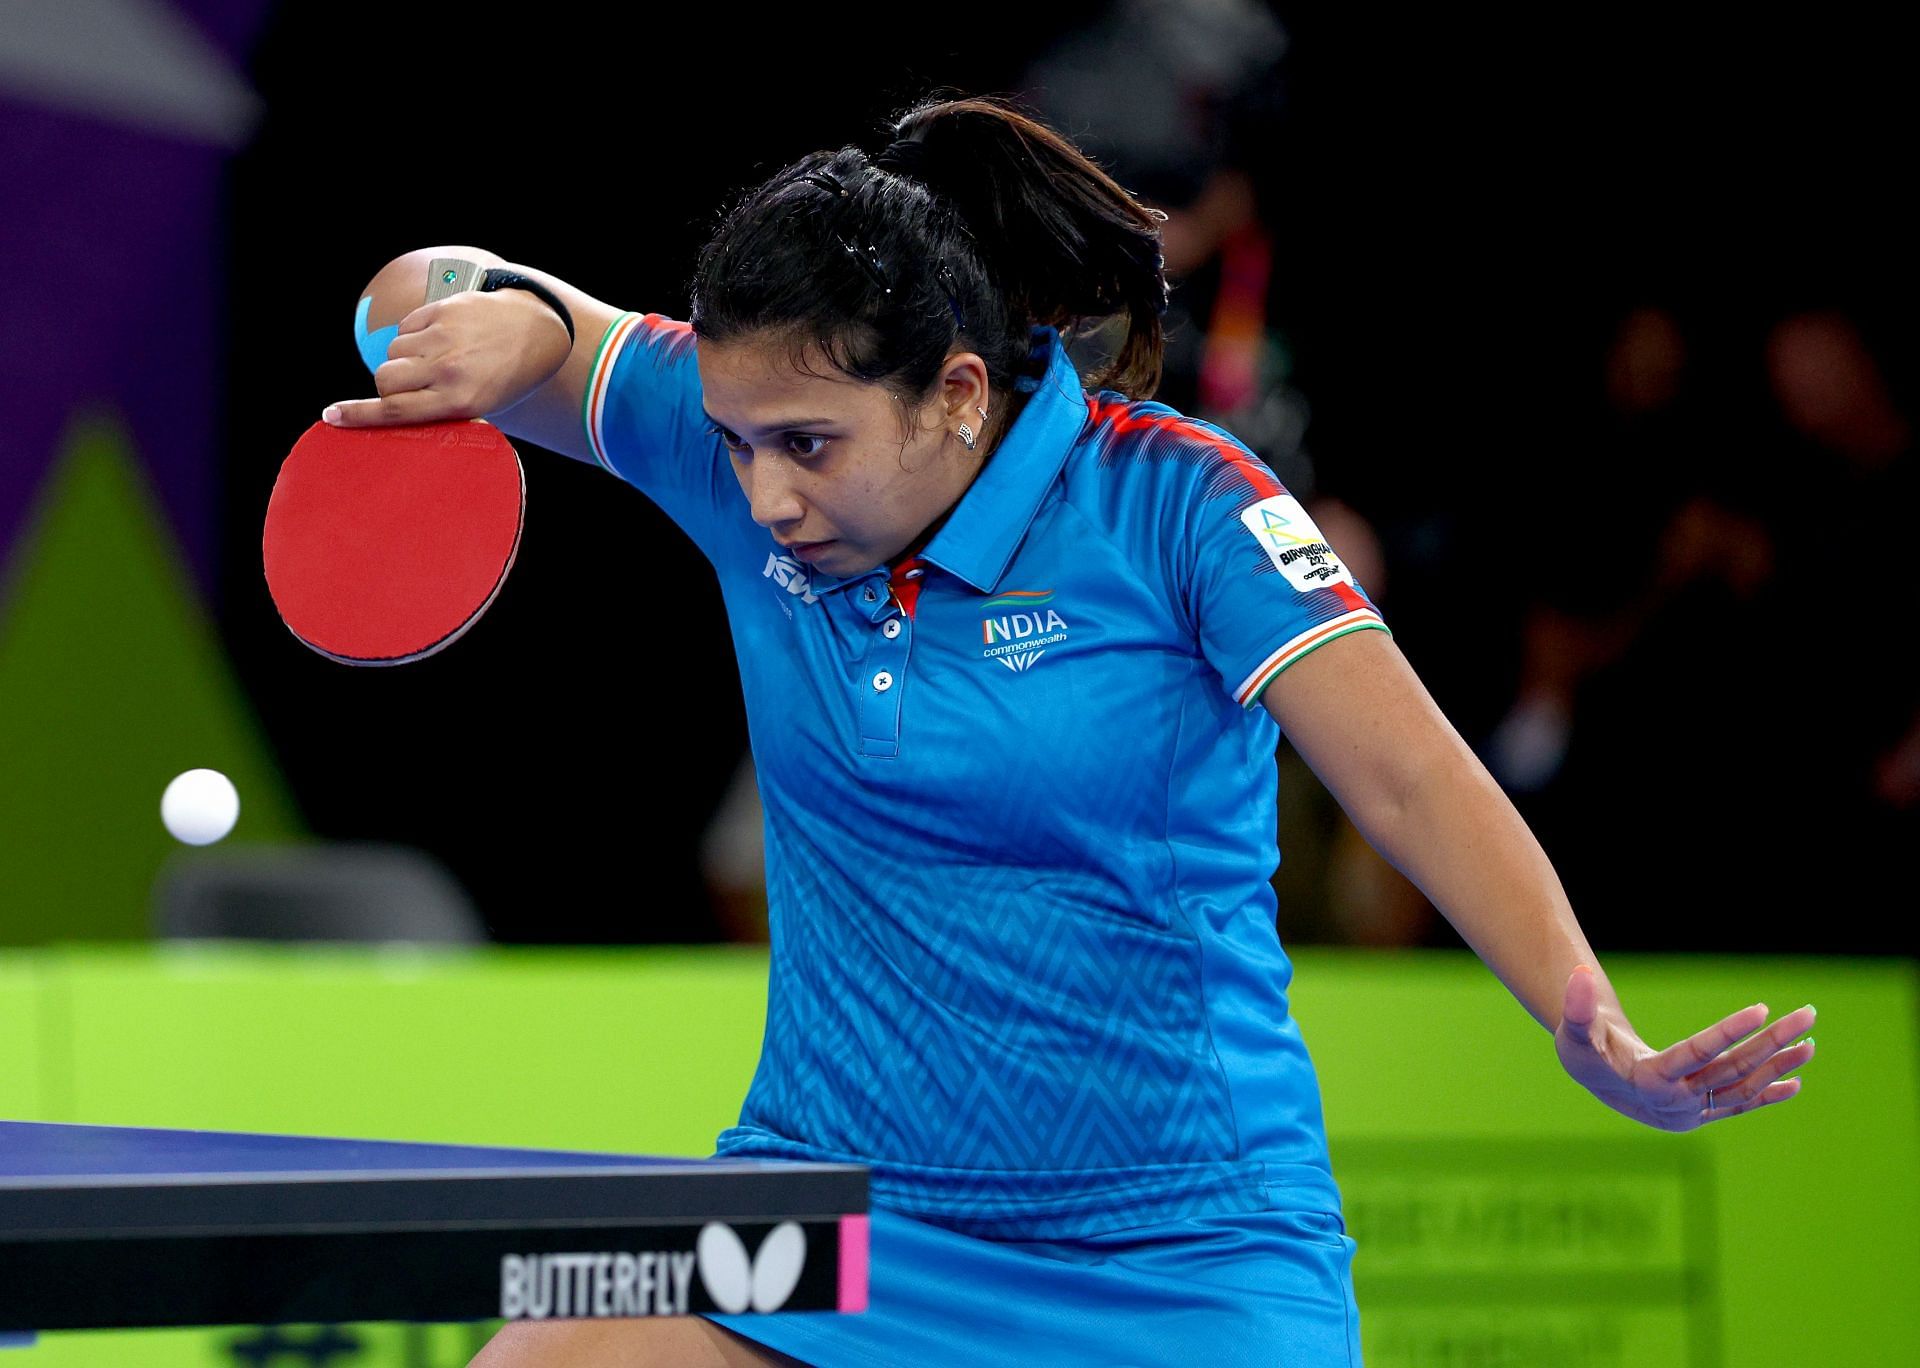 Indian table tennis player Reeth Rishya in action at CWG 2022. (PC: Getty Images)